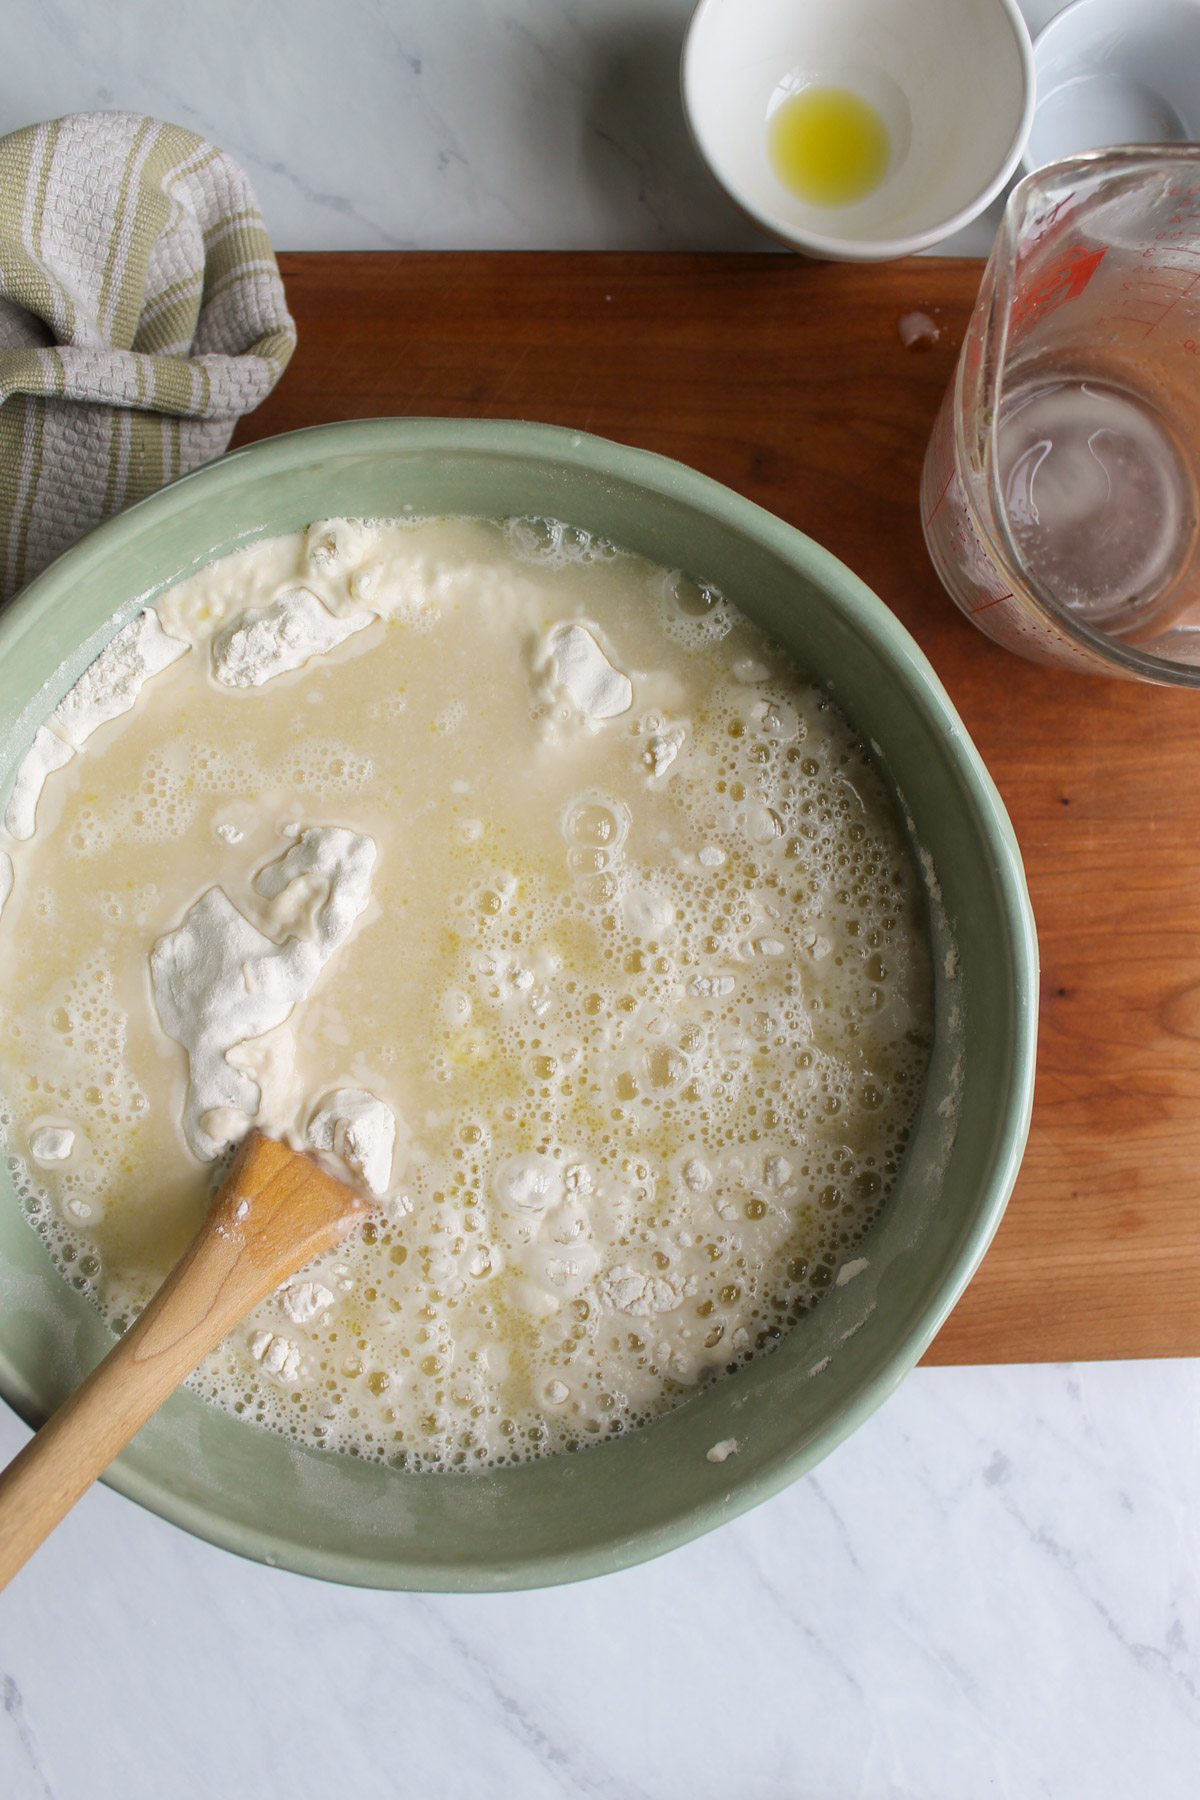 Liquid poured into a bowl of flour with a wooden spoon.